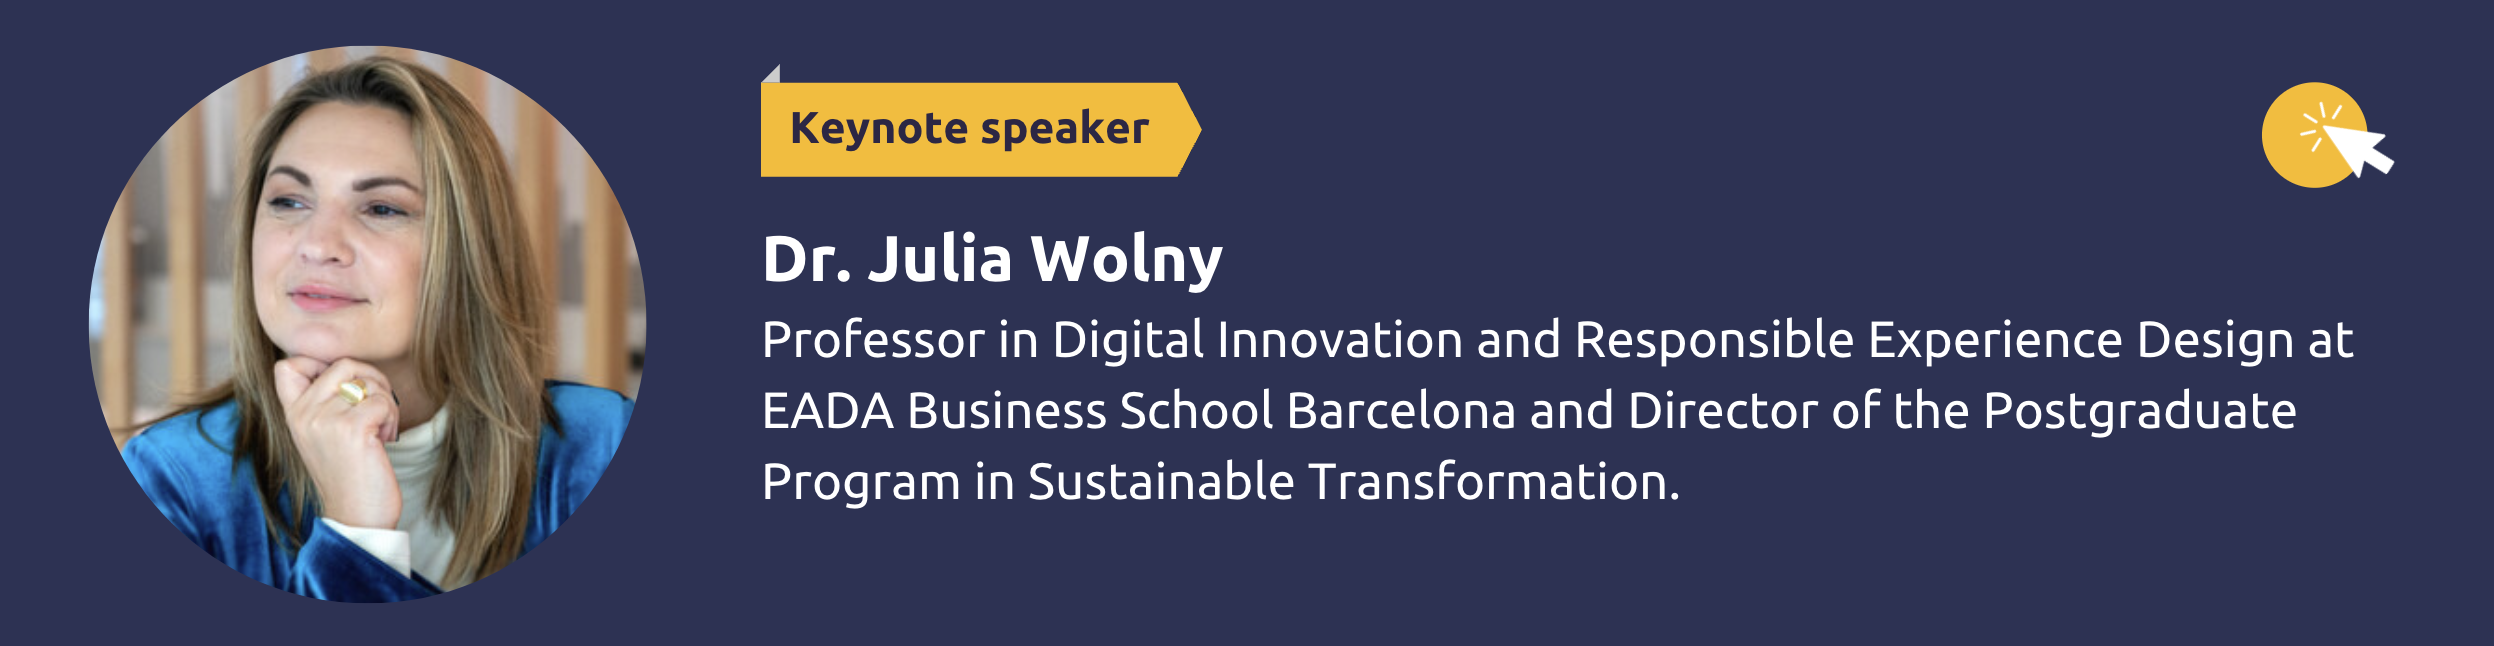 Dr. Julia Wolny is a Professor in Digital Innovation and Responsible Experience Design at EADA Business School Barcelona and Director of the Postgraduate Program in Sustainable Transformation.